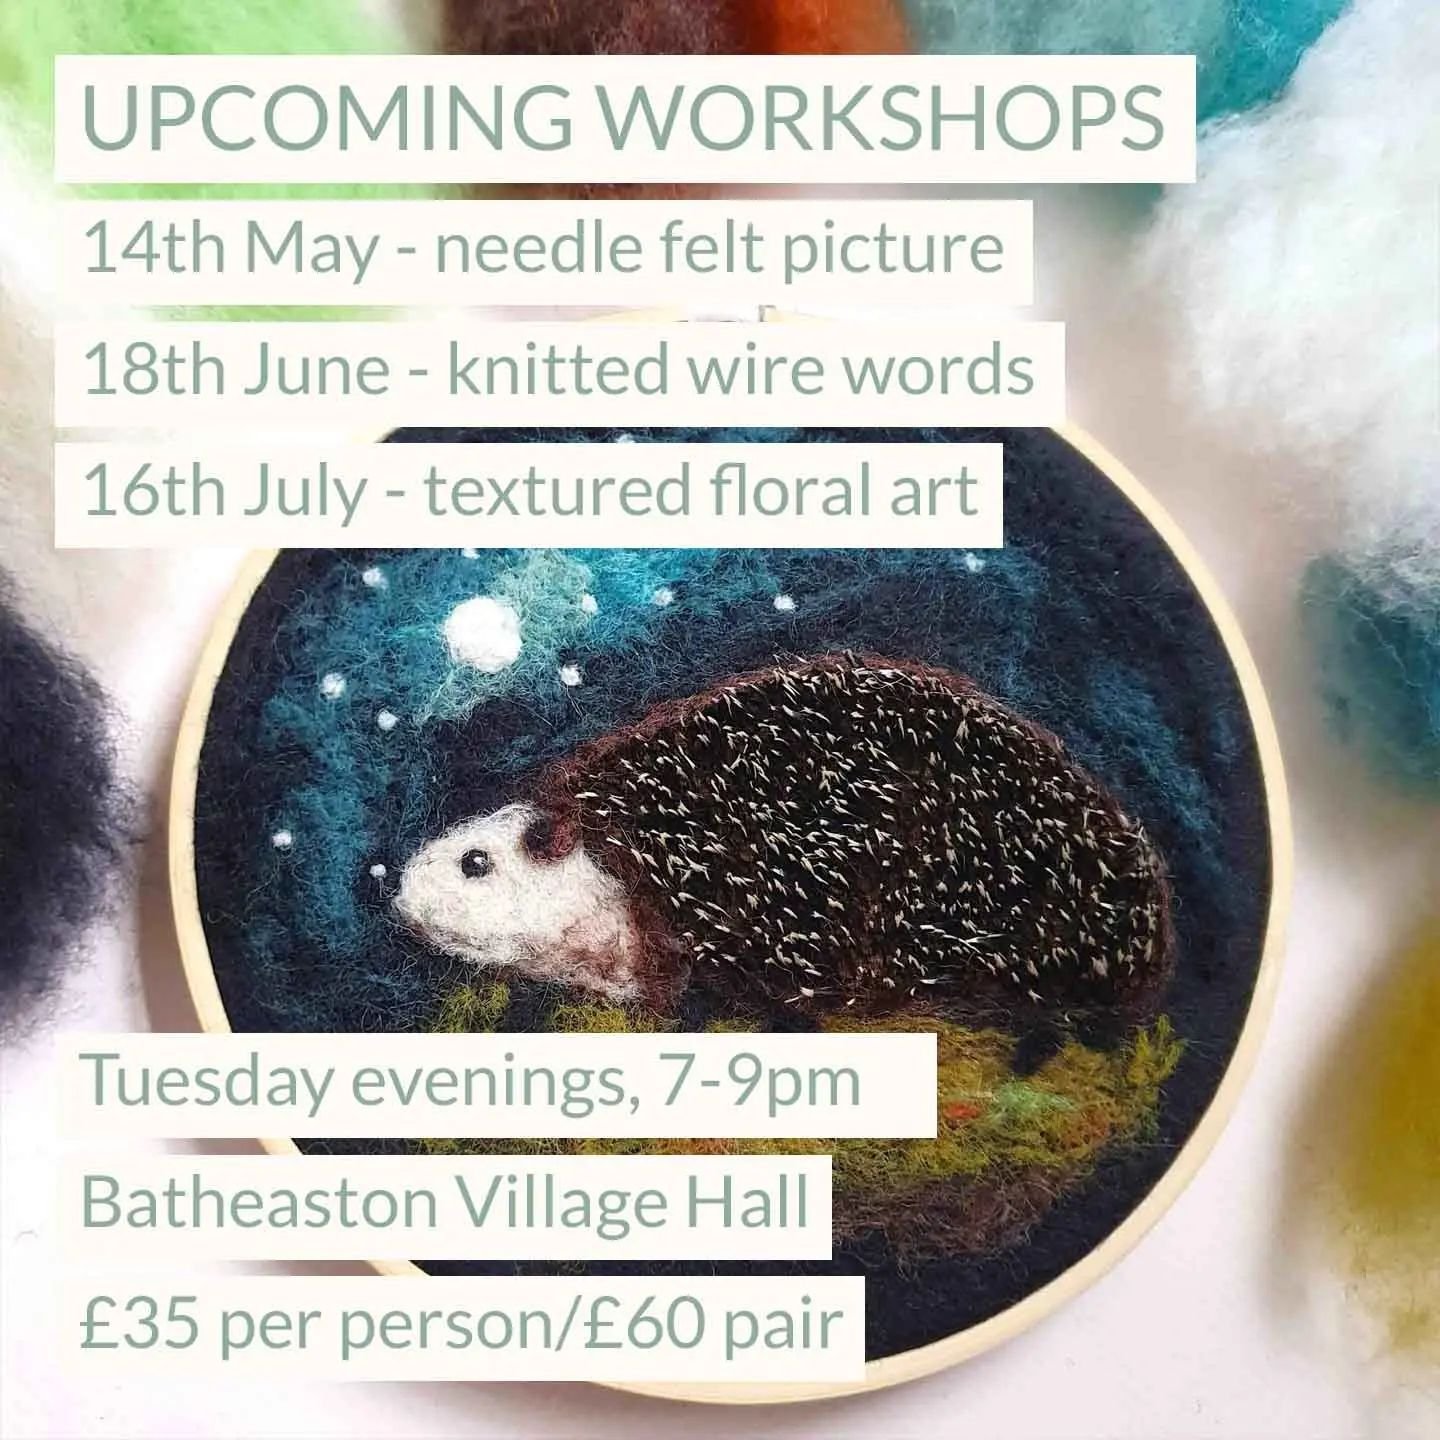 Fancy a fun night of crafting? I've released my next 3 monthly craft workshops, and I'm so excited for them! I think they're going to be really fun 😊

Bring a friend or come alone and have a sociable night, meeting other crafters, learning new skill